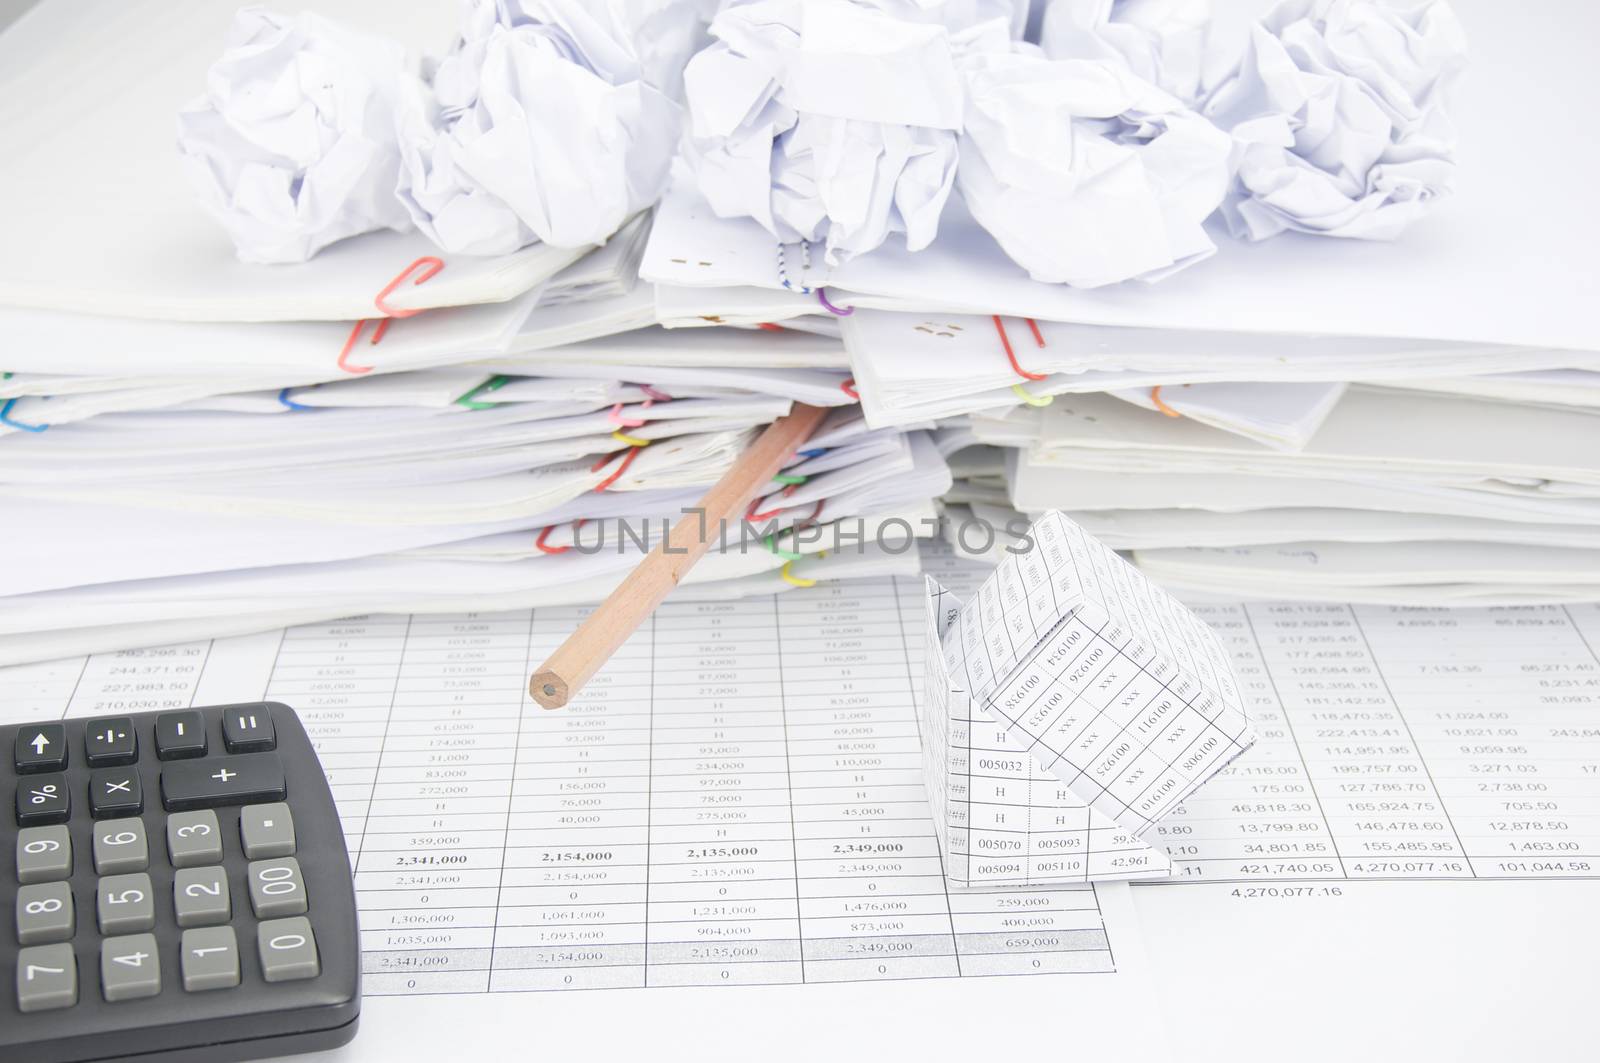 Bankruptcy of house and calculator on finance account have bottom of pencil with group of paper ball on stack of paperwork as background.